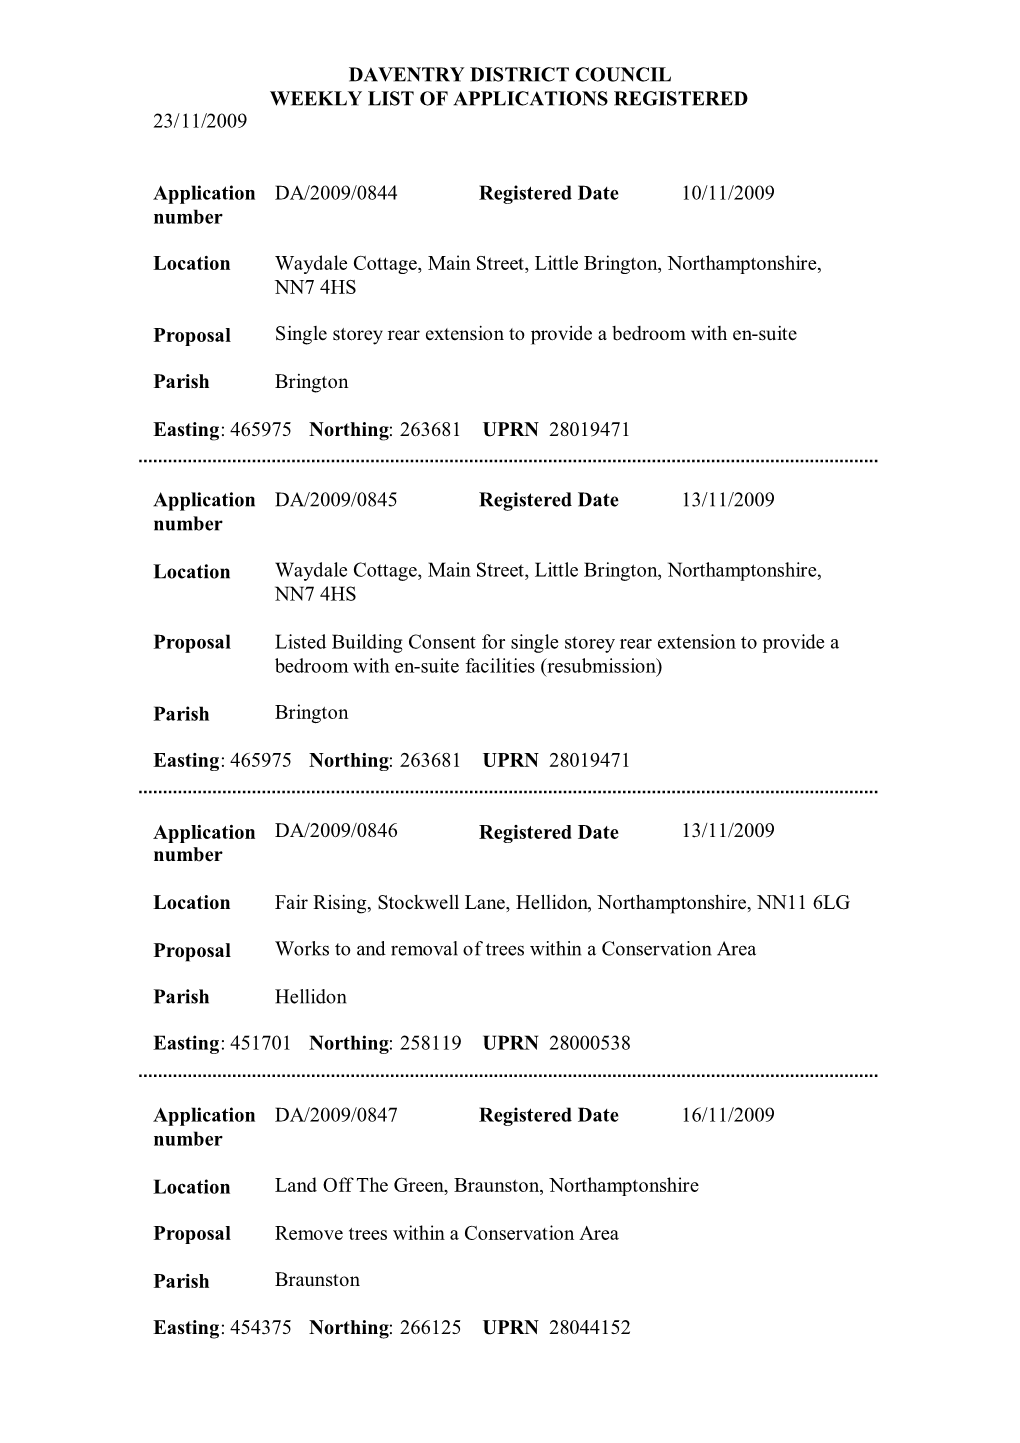 Daventry District Council Weekly List of Applications Registered 23/11/2009